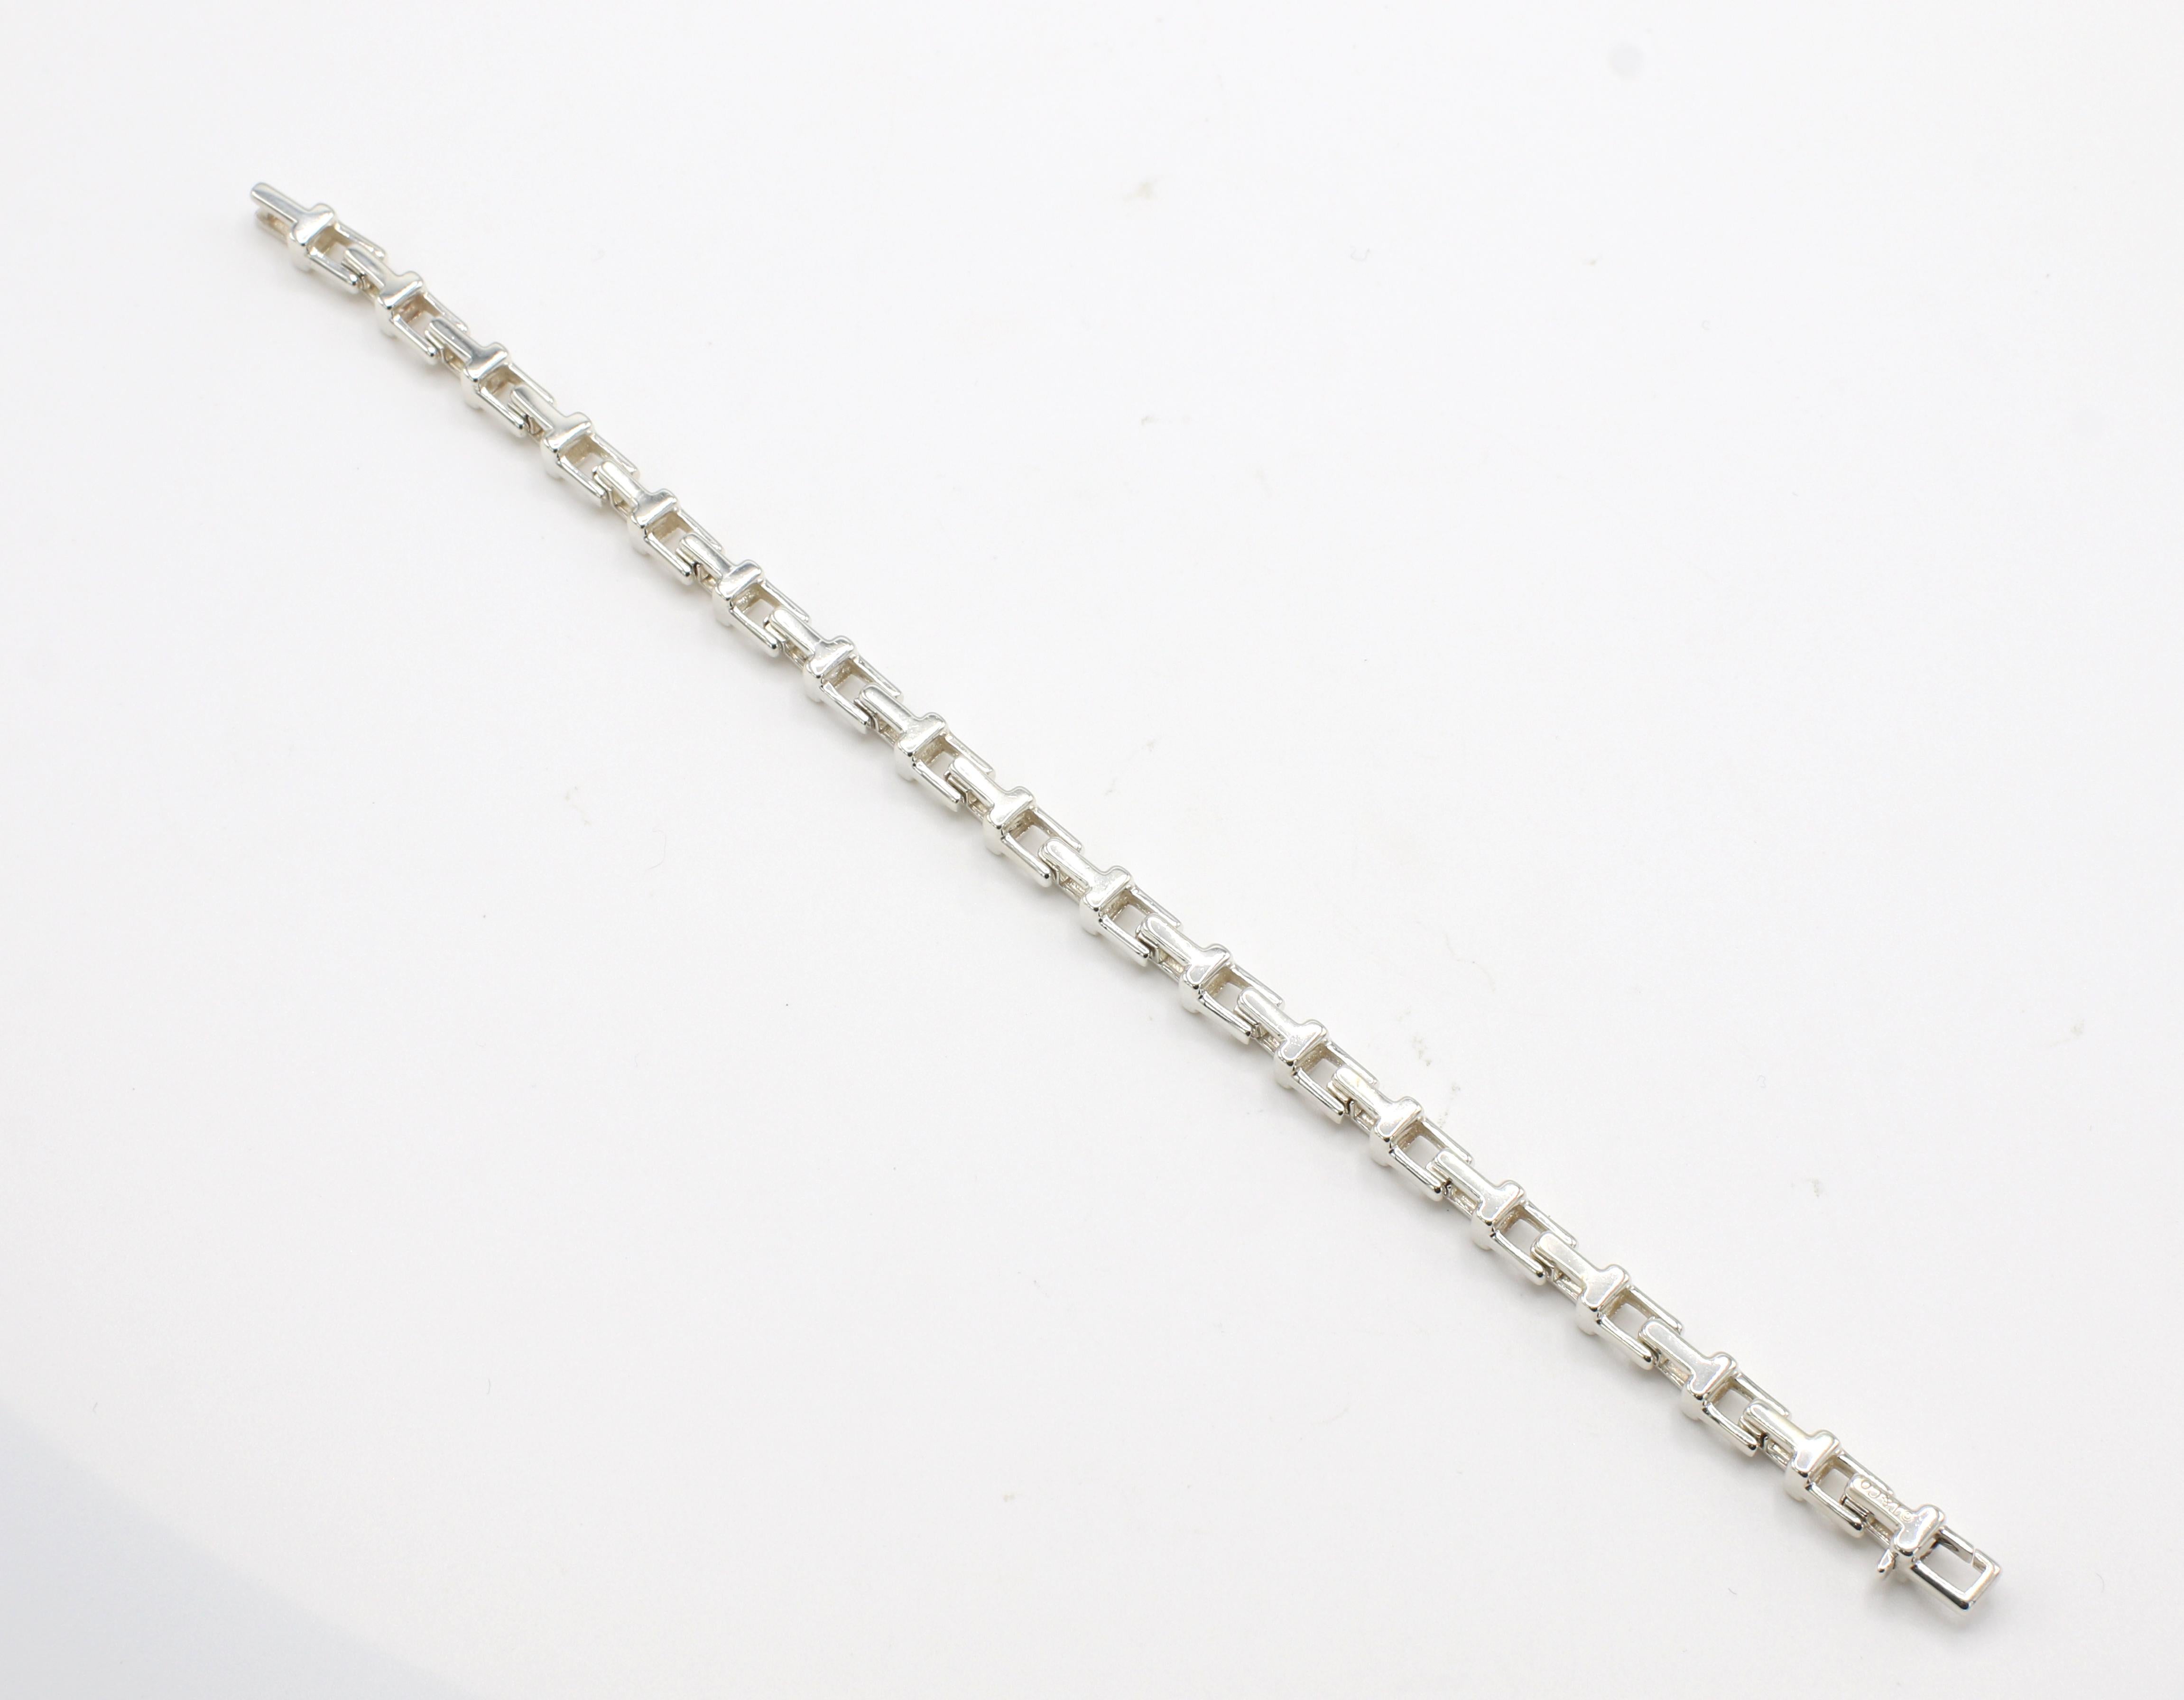 Tiffany & Co. T Collection T Chain Link Sterling Silver Bracelet

Metal: Sterling silver 925
Weight: 13.25 grams
Length: 7.25 inches
Width: 4.5mm
Signed: T&Co. Ag925 Italy